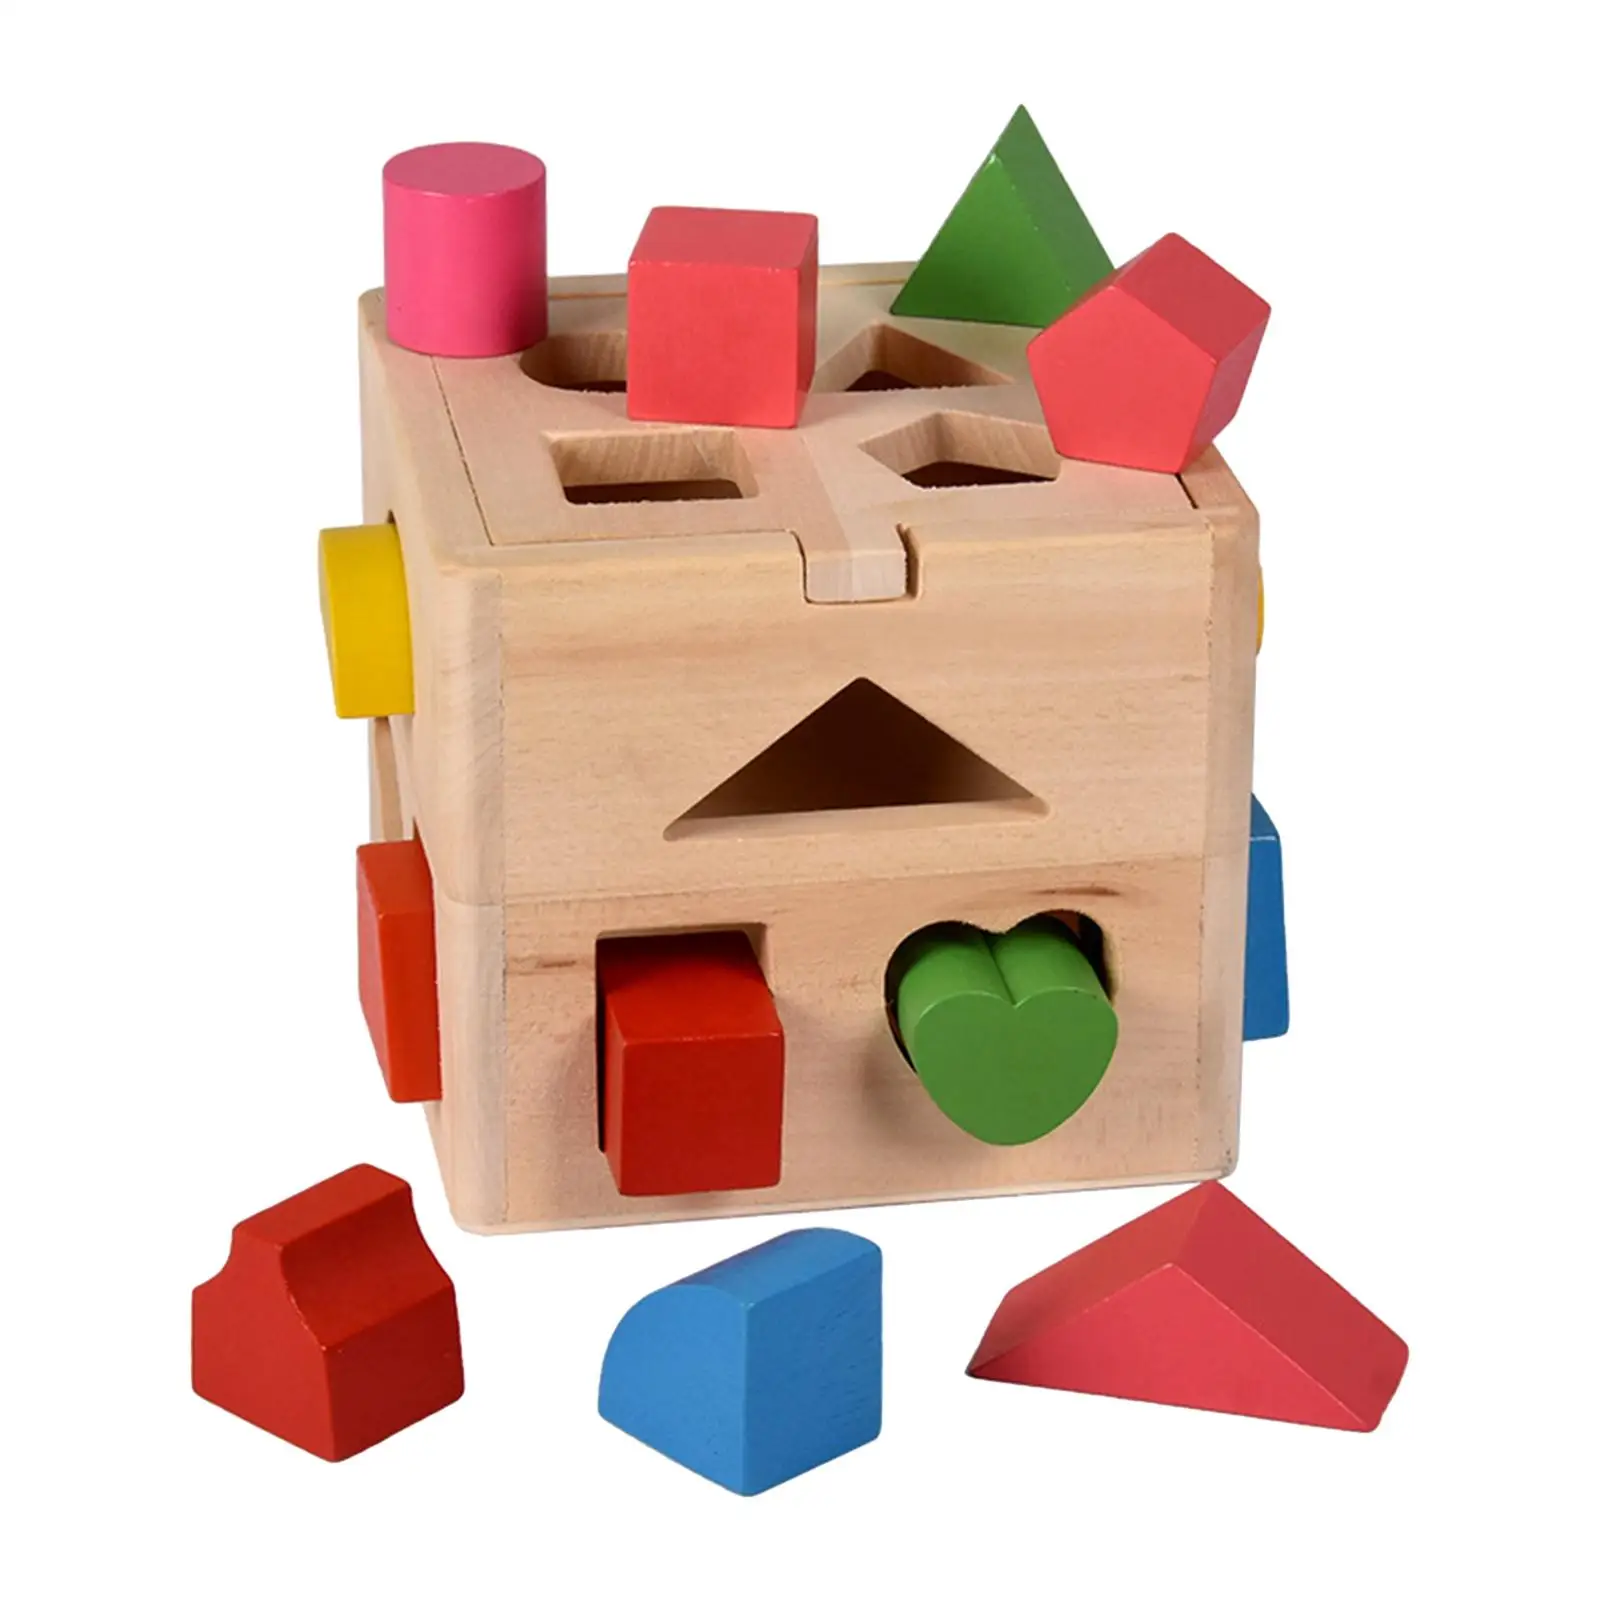 Montessori Shape Sorter Toys, Early Educational Toys, Geometric Shapes Toy Puzzles for Kids Boy Toddlers